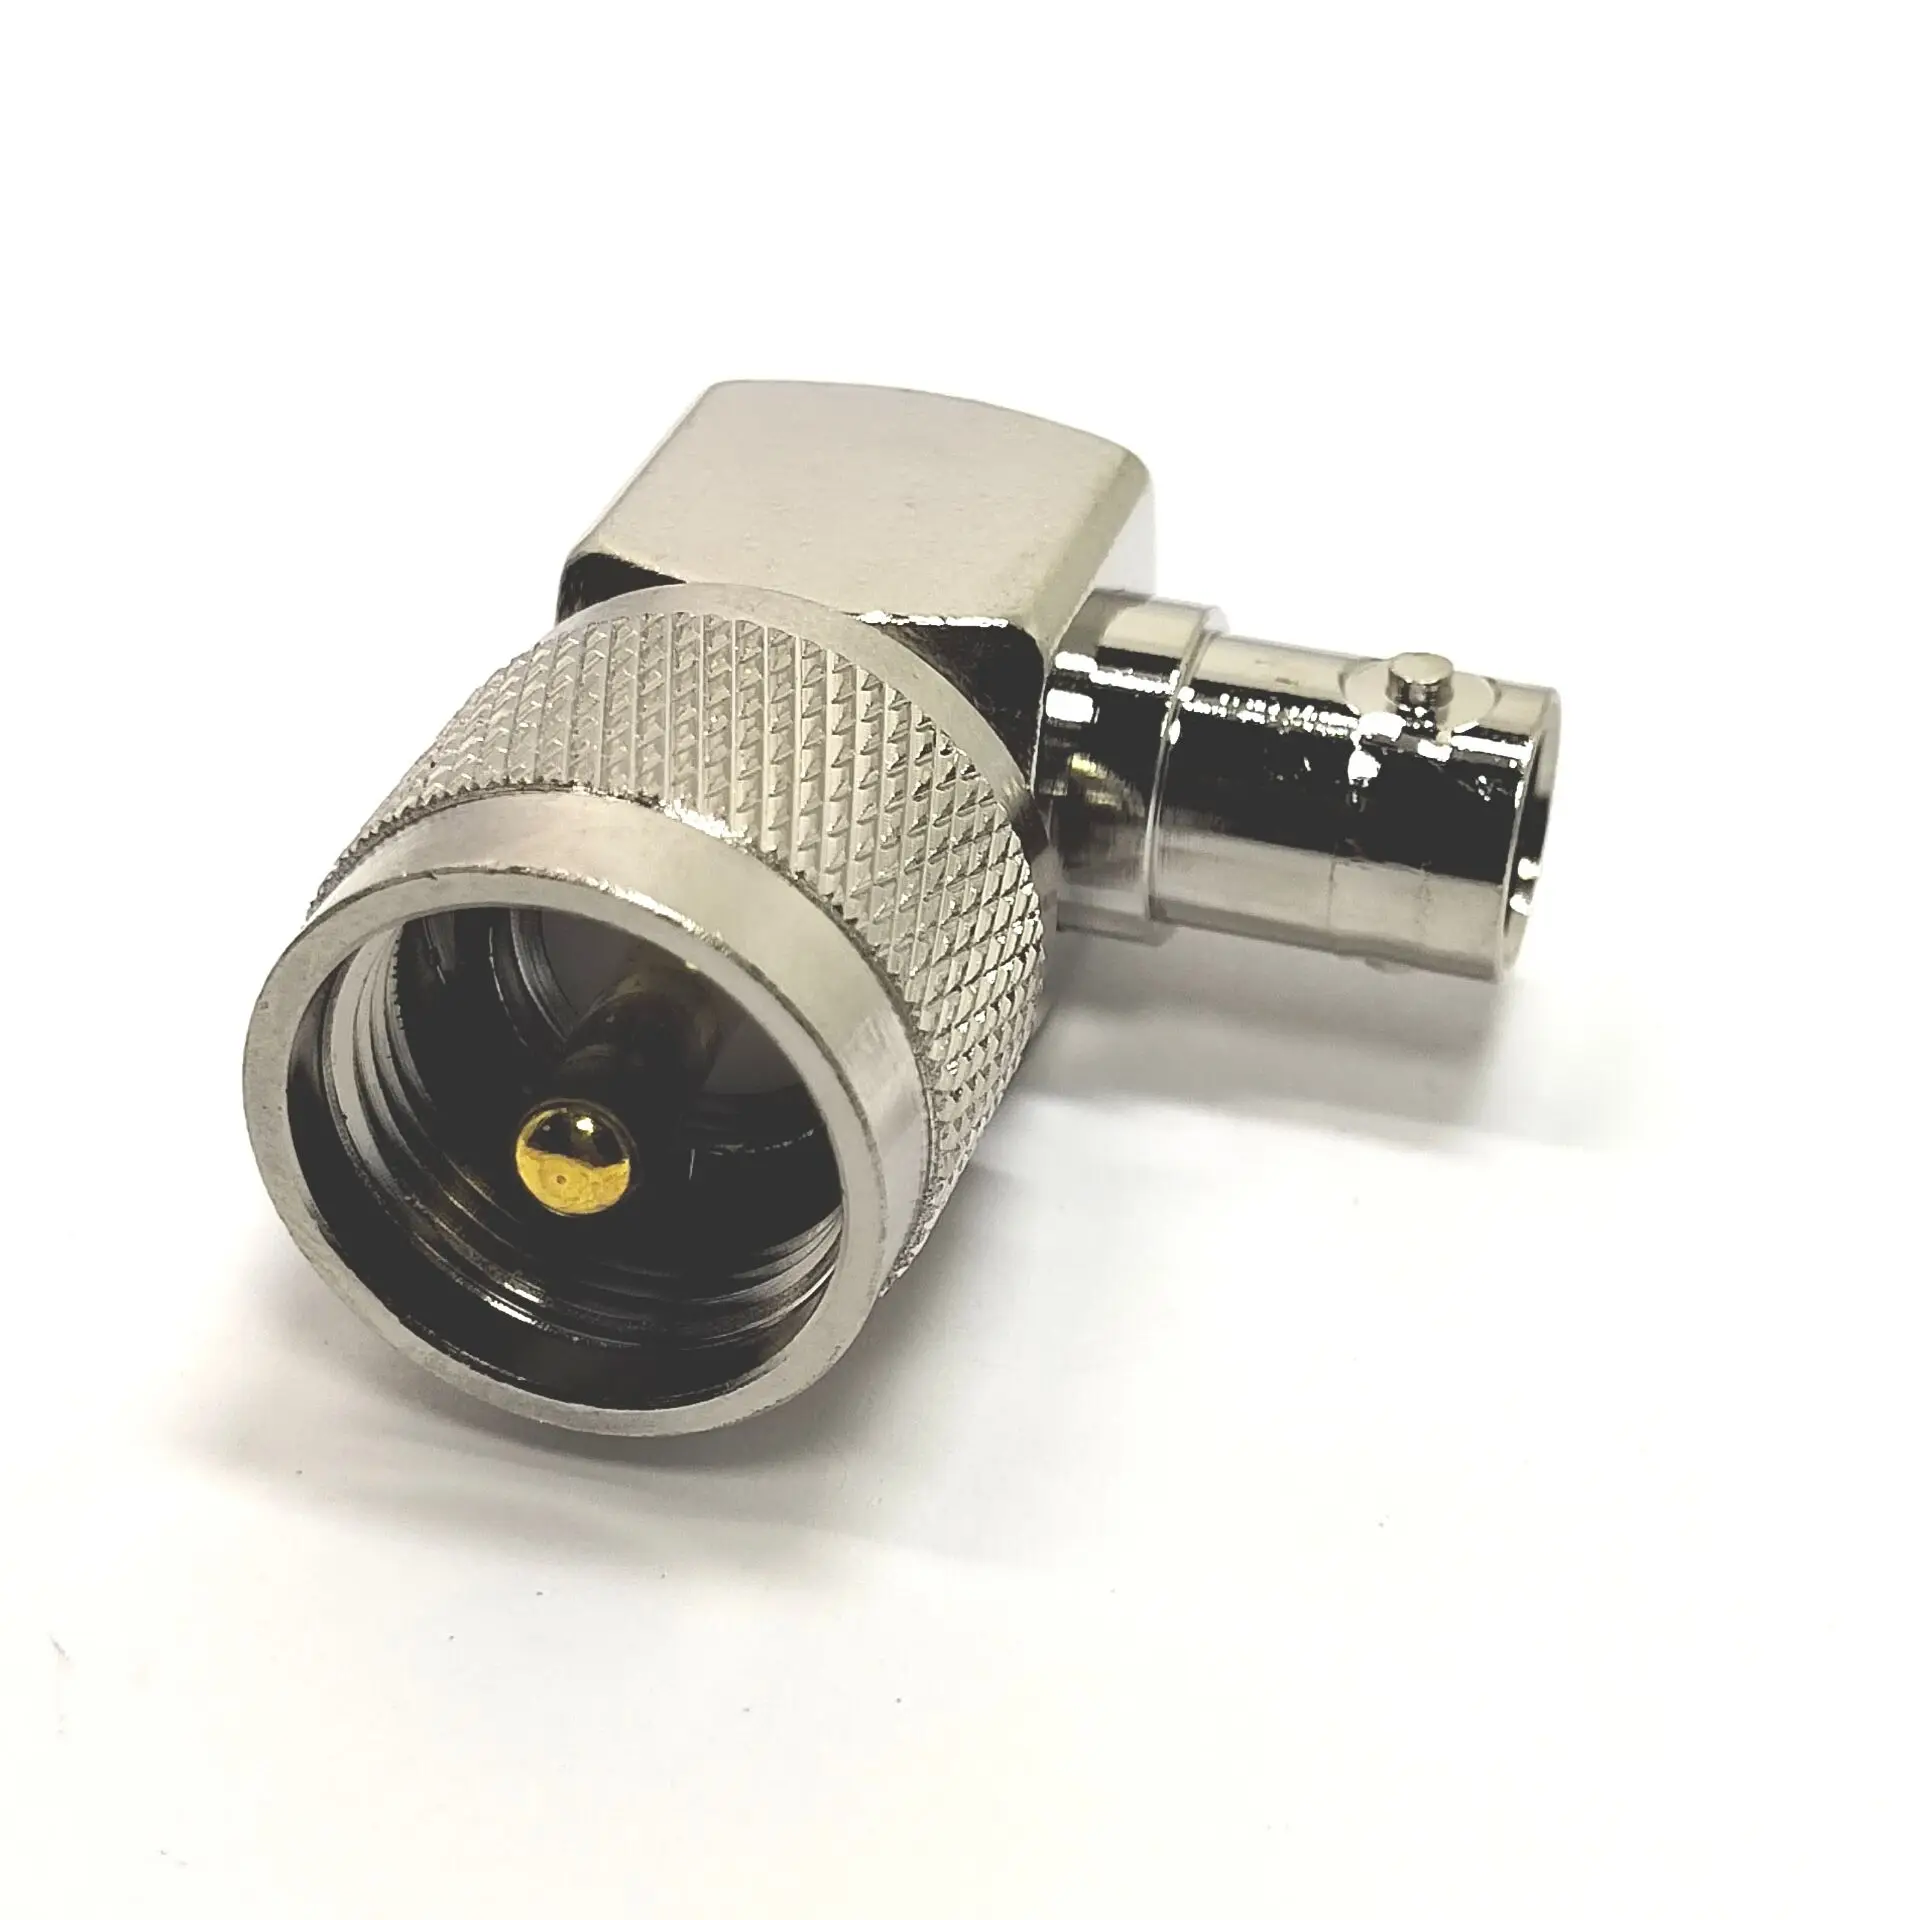 Nickel plated Rf Connector BNC Female To UHF PL259 Male Right Angle Adapter in stock details